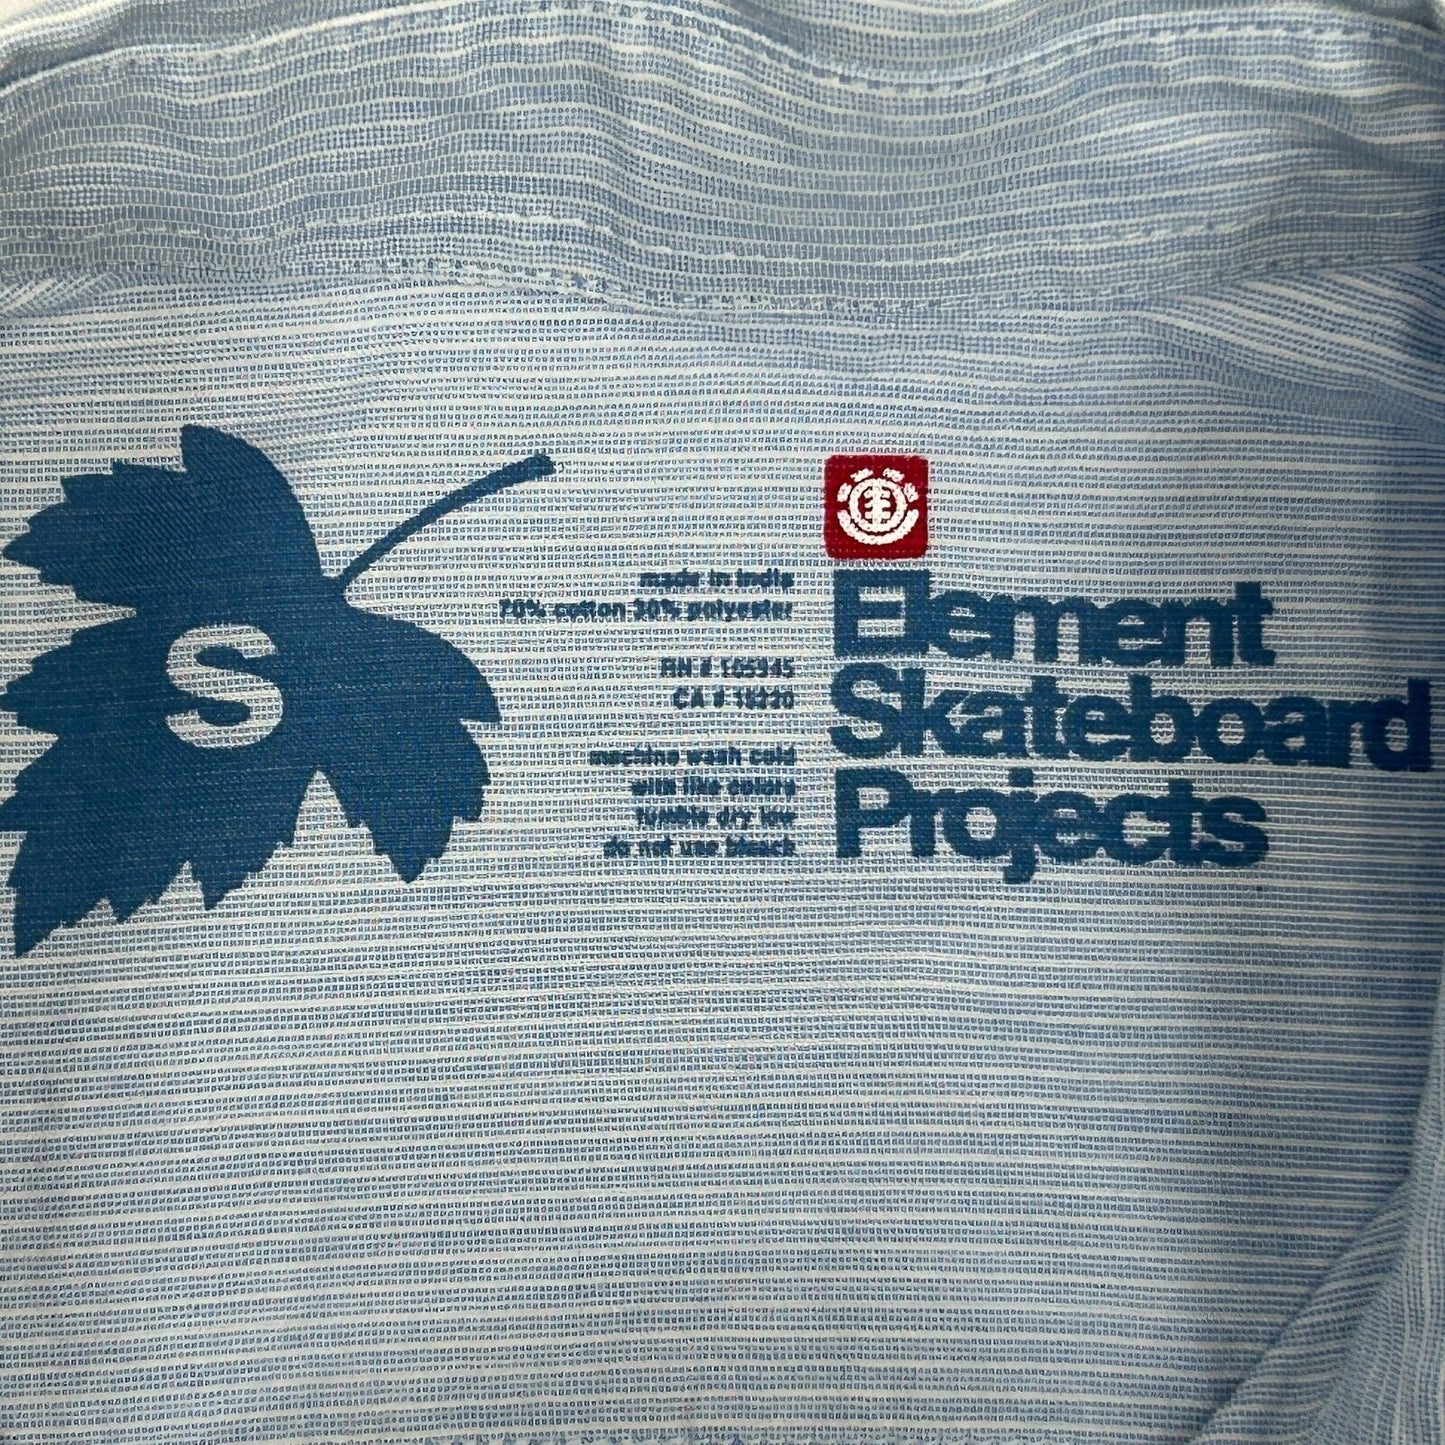 Element Skateboard Projects Button Front Shirt Small Skating Skater Mens Blue